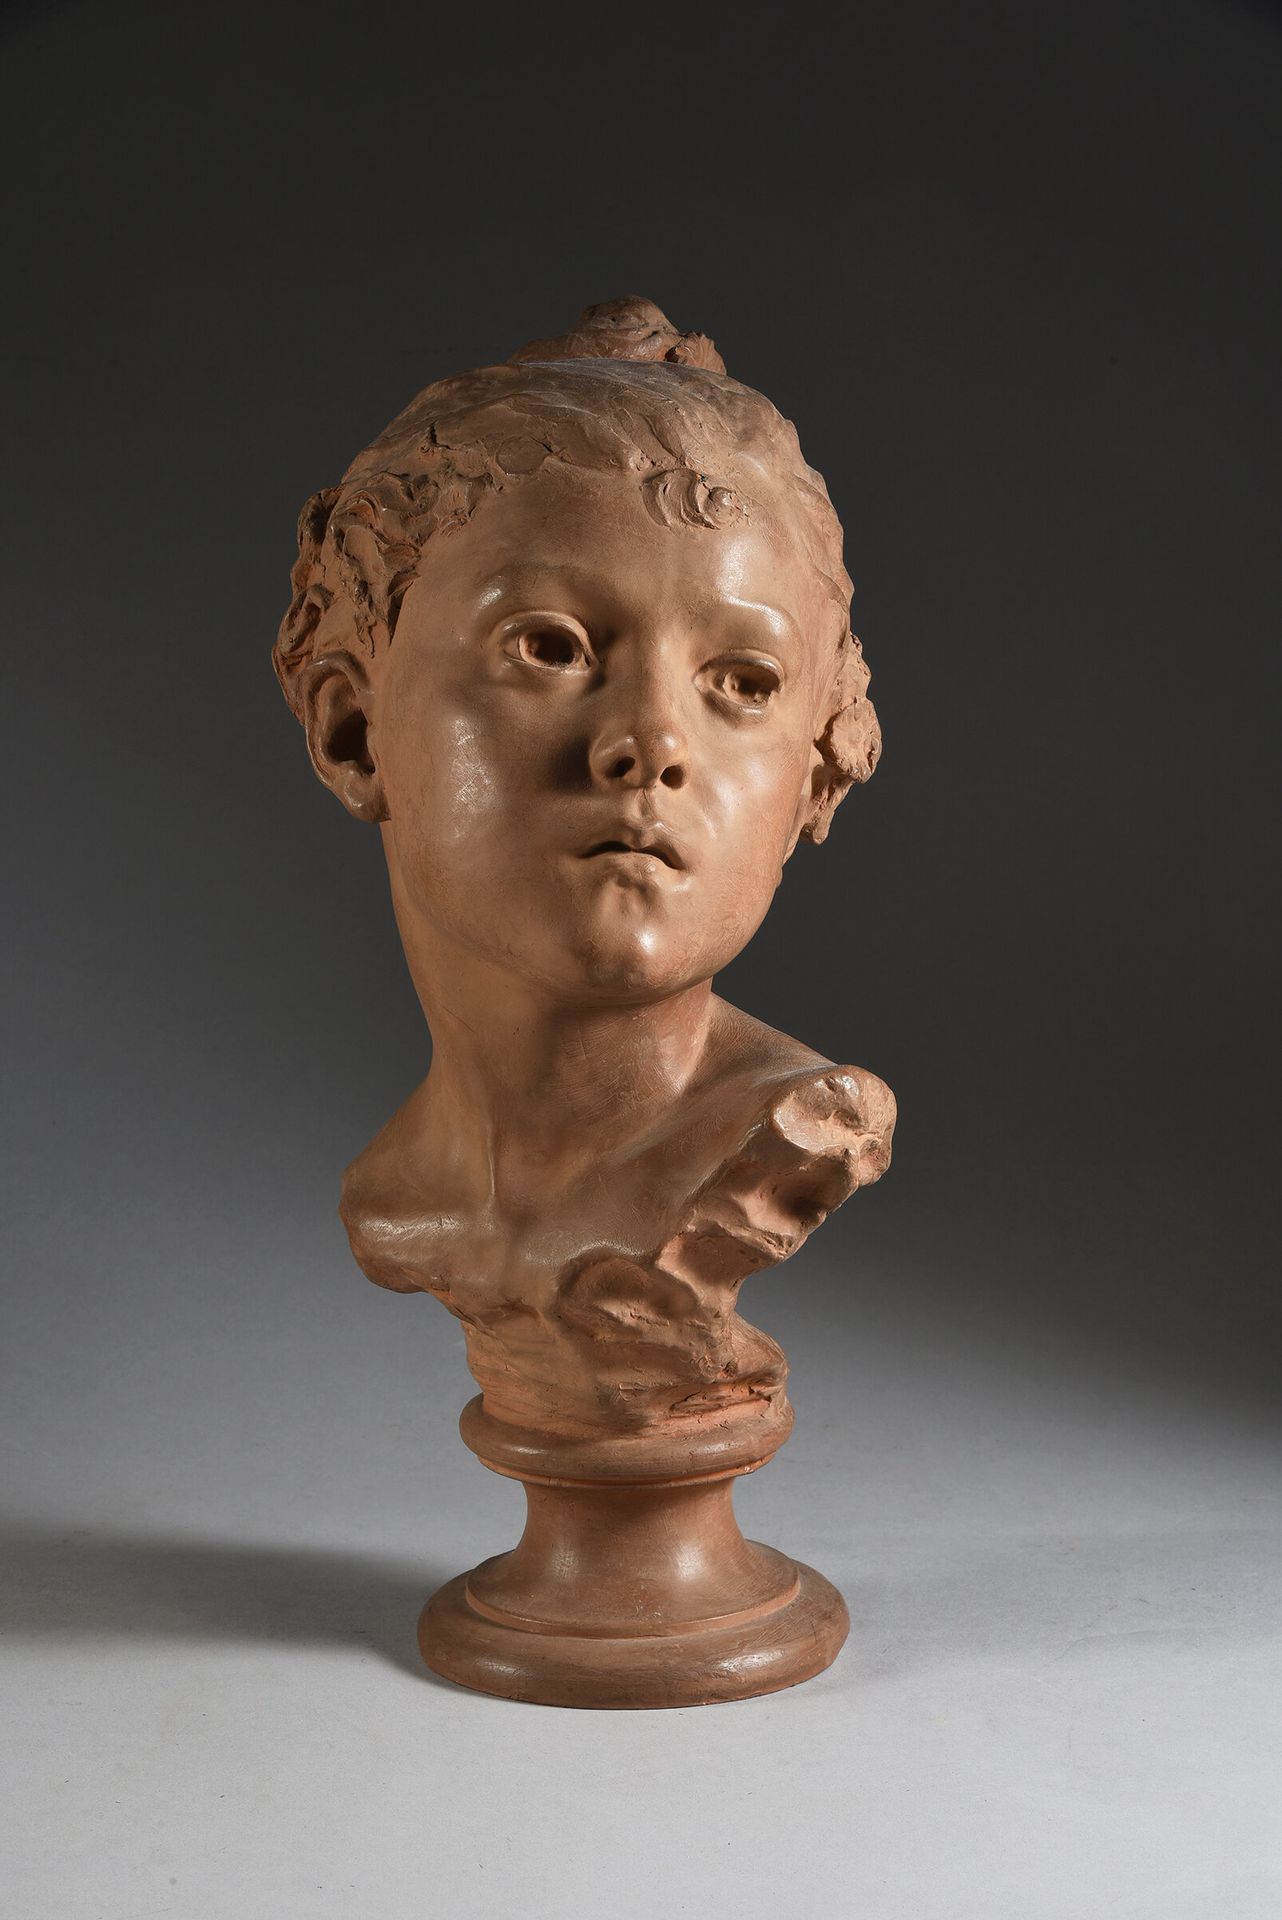 Jules DESBOIS (1851 - 1935) 
Bust of a young girl.
Terracotta proof.
H. : 40 cm.